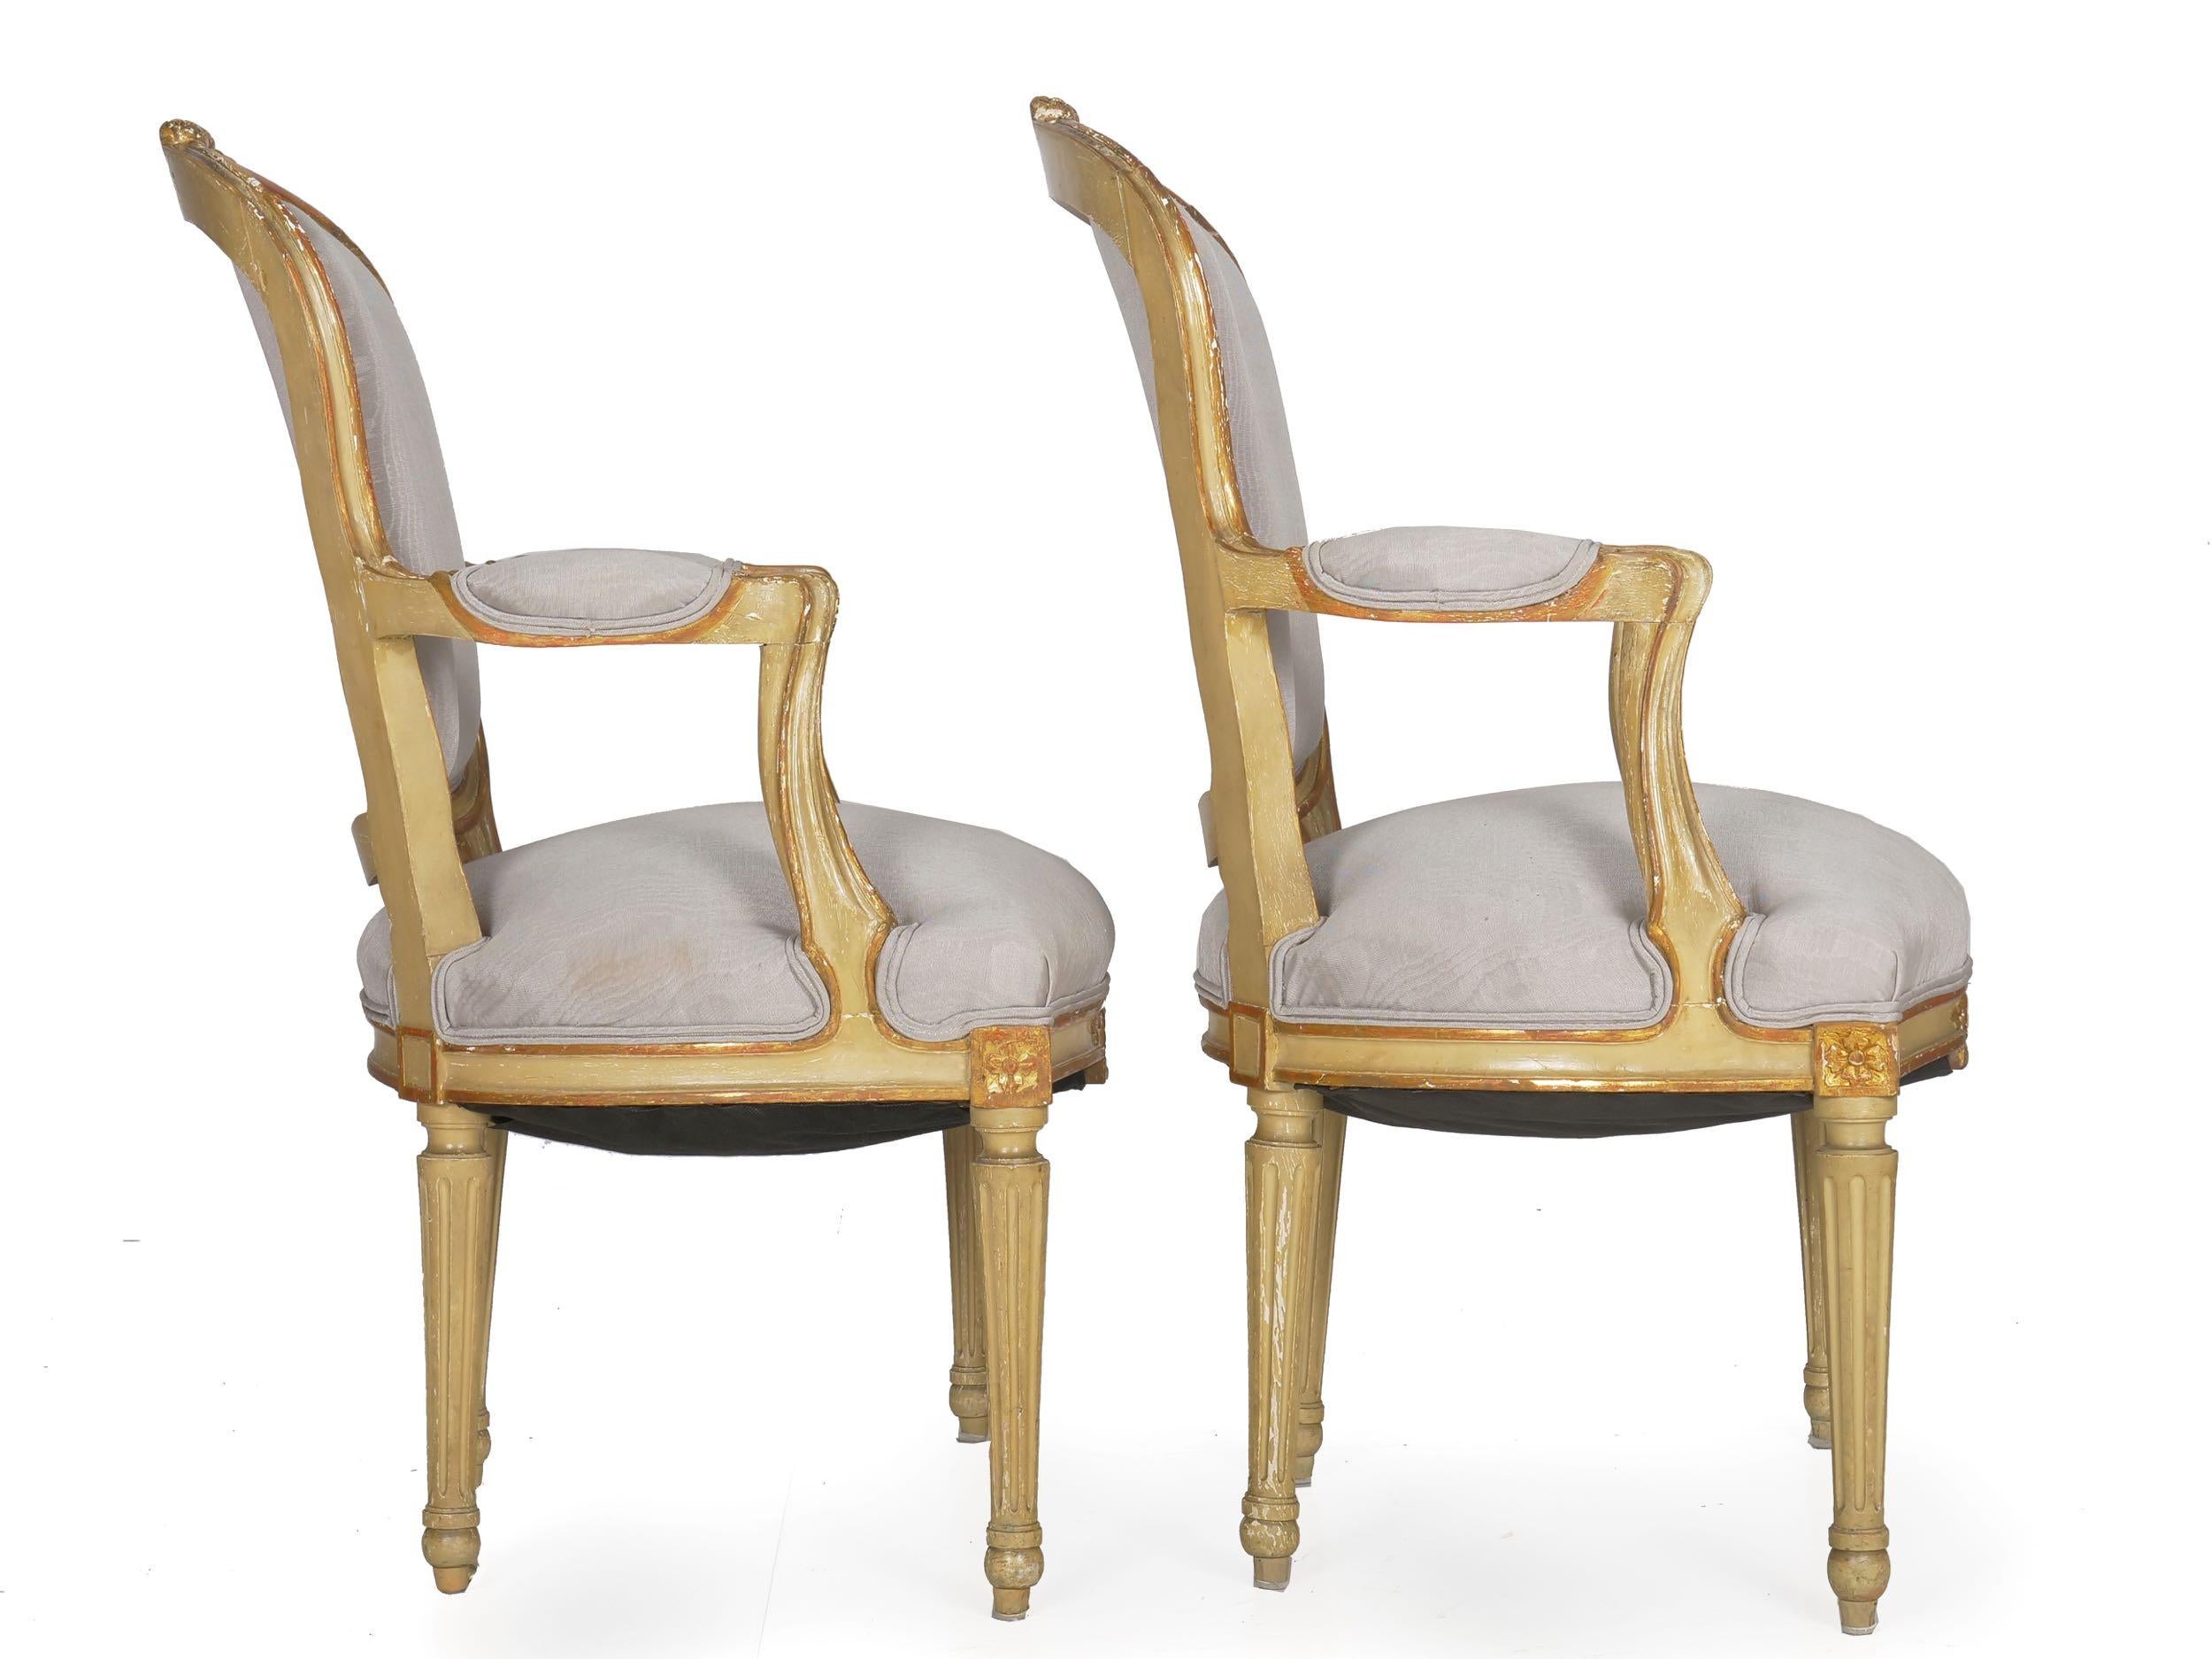 French Louis XVI Style Antique Distressed Painted Armchairs, 19th Century, Pair 1